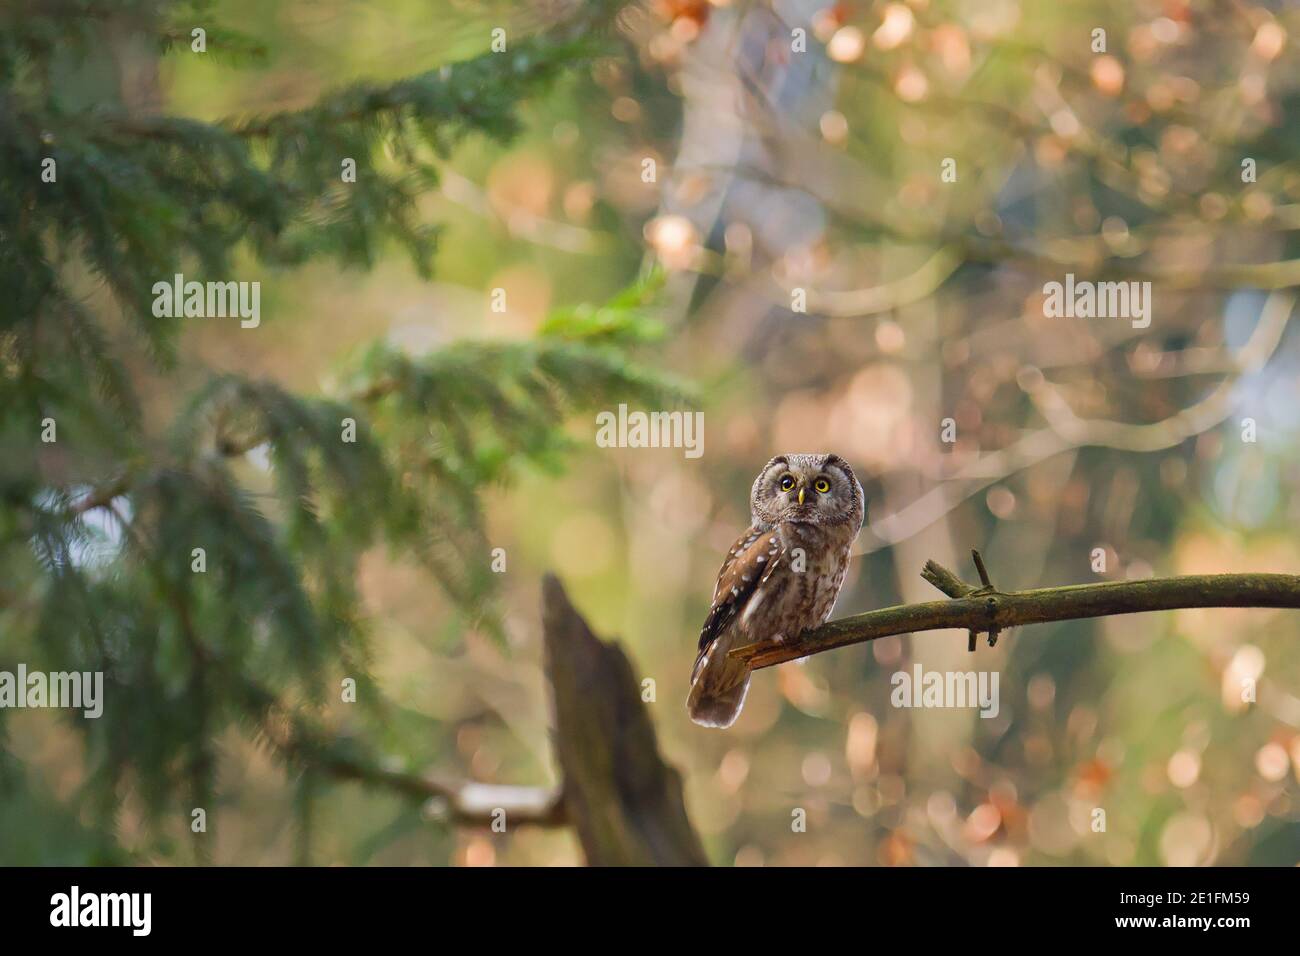 Tengmalm's owl (Aegolius funereus) perched on branch in forest, Hesse, Germany Stock Photo